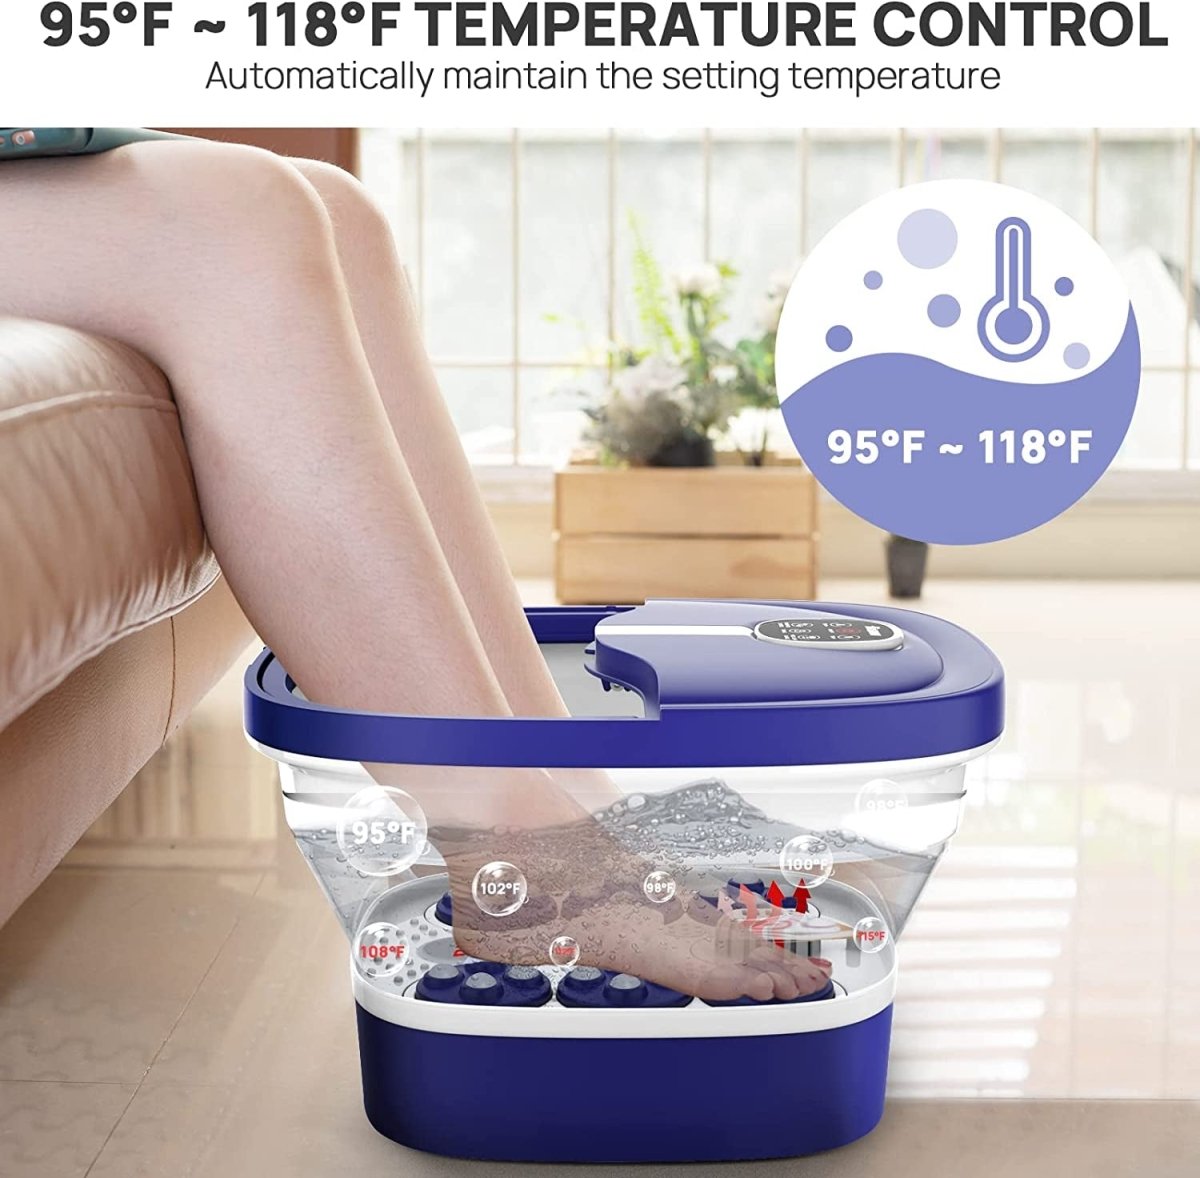 Collapsible Foot Bath with Heat, Bubble, Remote, and 24 Motorized Massage Balls - Shiny Nails